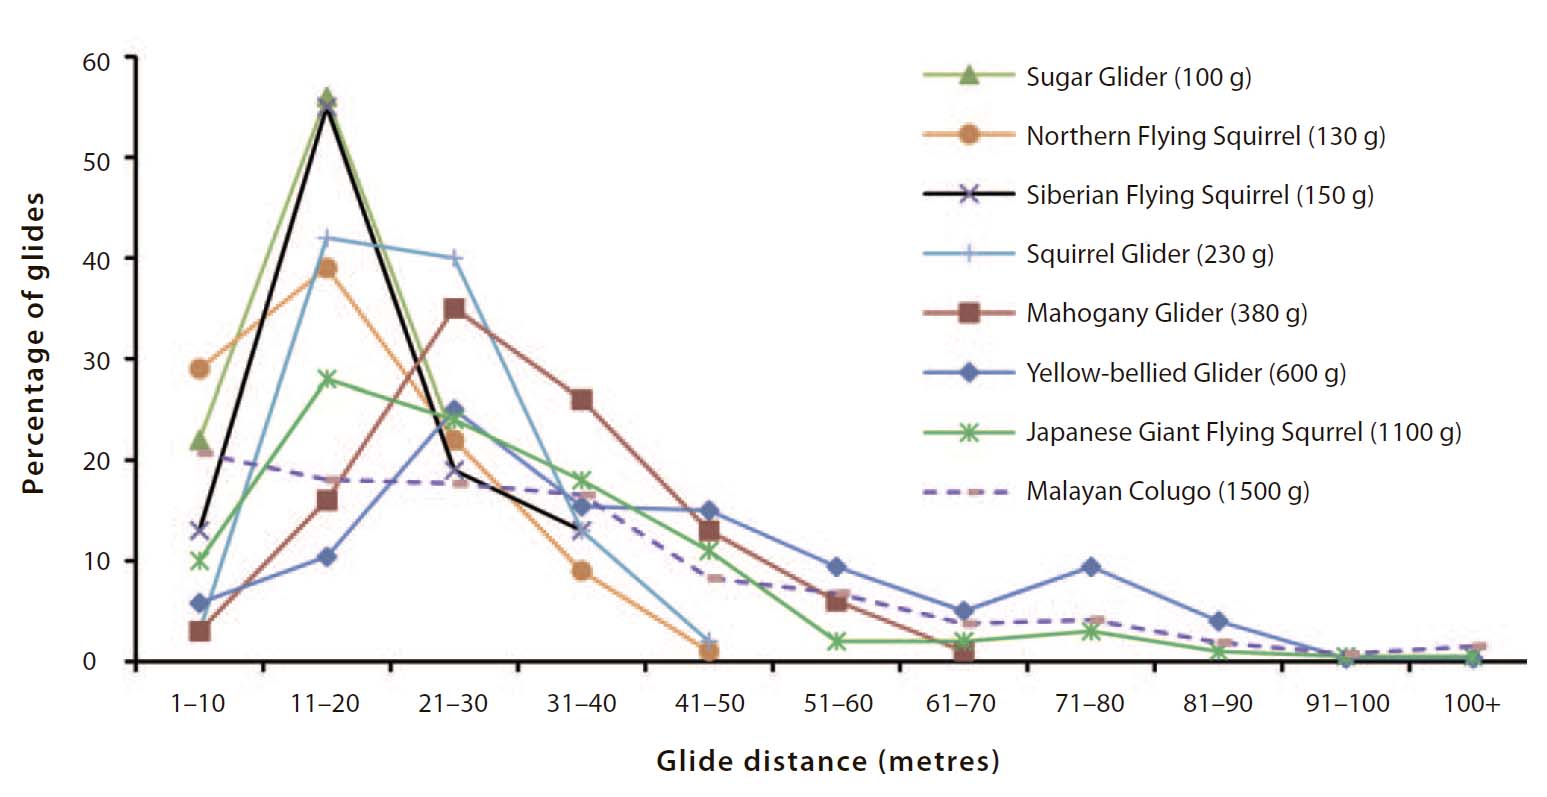 The relationship between the body mass of different species of gliding mammals and their glide distances